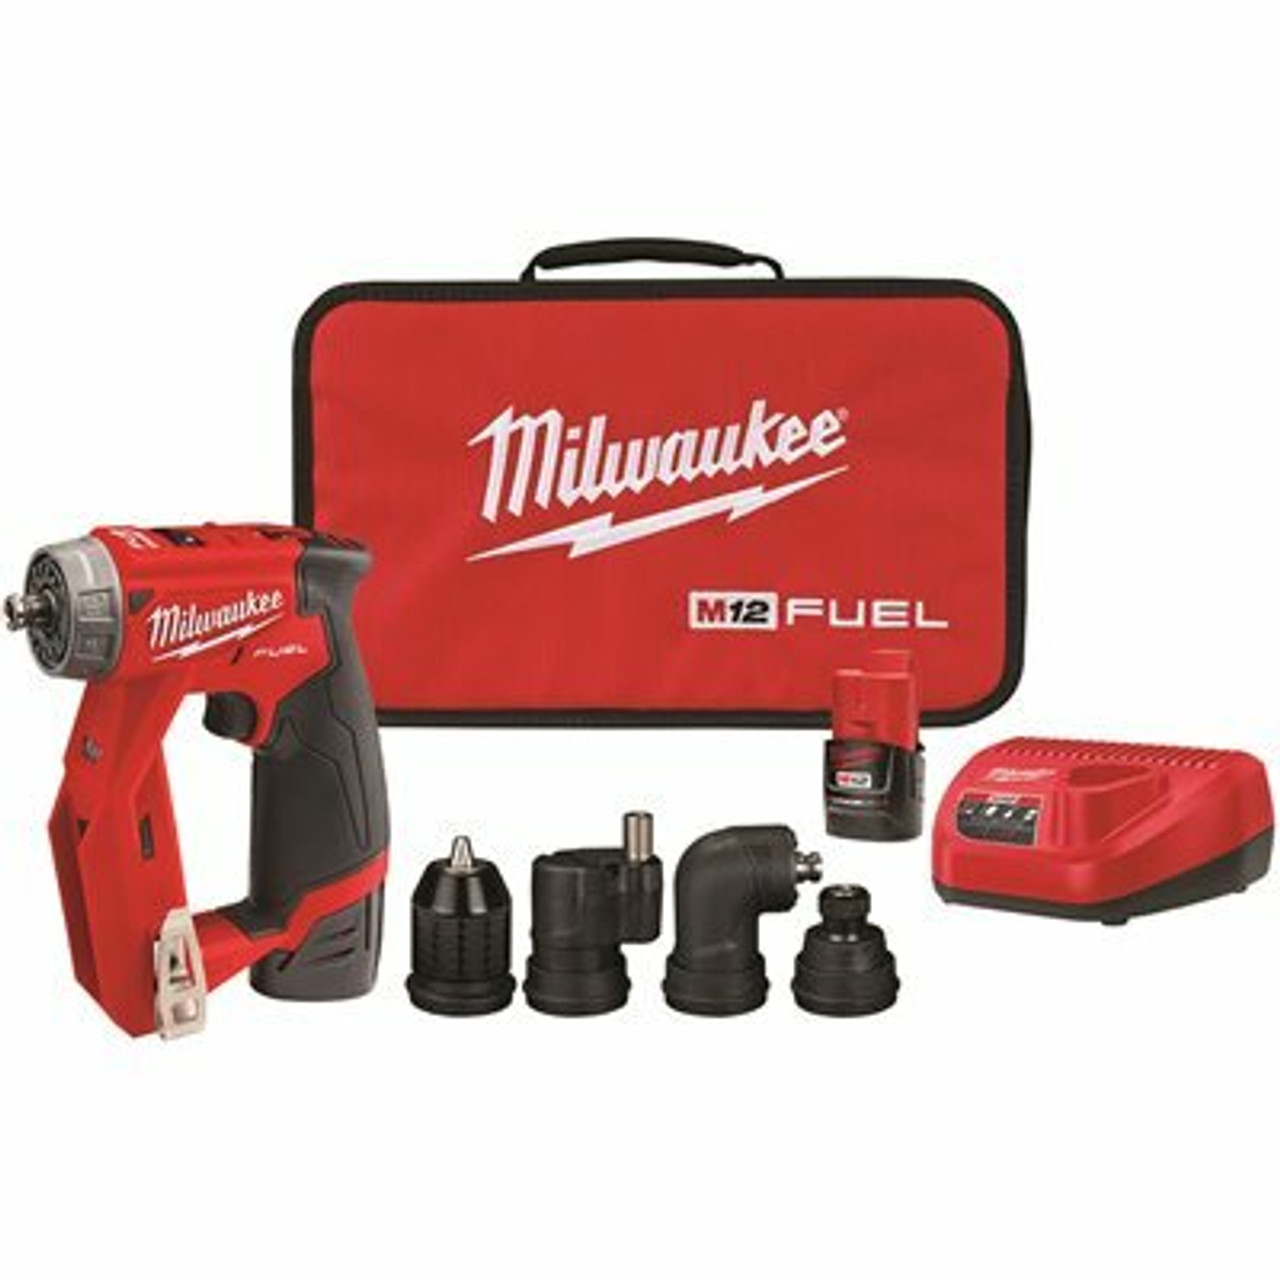 Milwaukee M12 Fuel 12-Volt Lithium-Ion Brushless Cordless 4-In-1 Installation 3/8 In. Drill Driver Kit With 4-Tool Heads